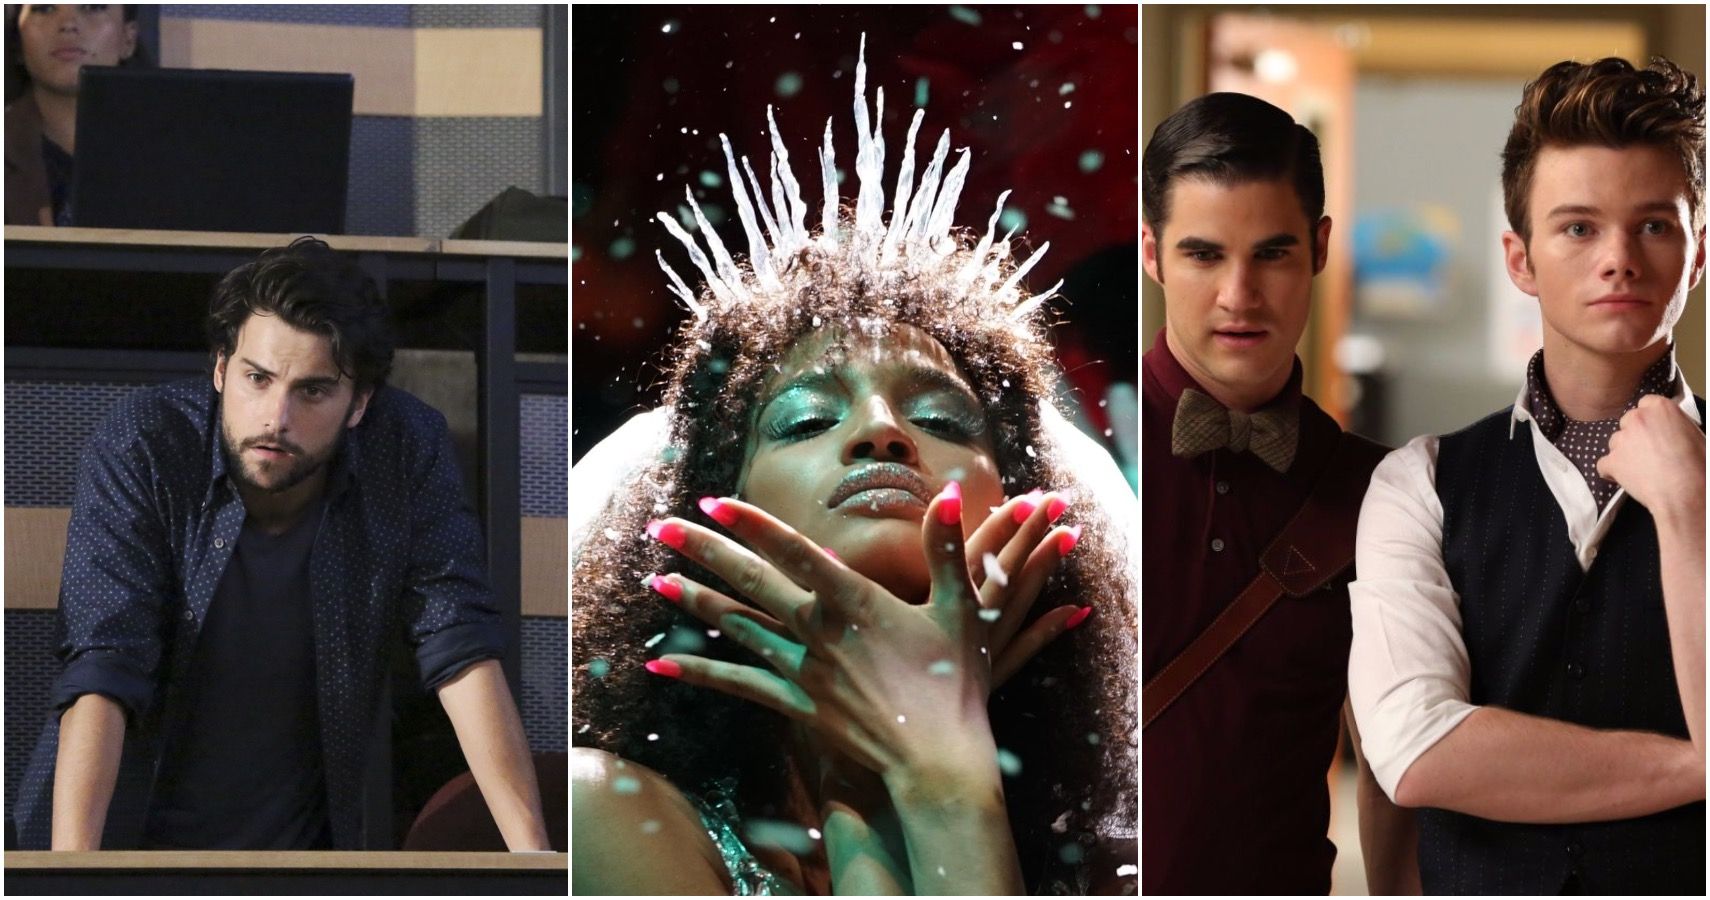 Top 10 LGBTQ Depictions On Popular Television